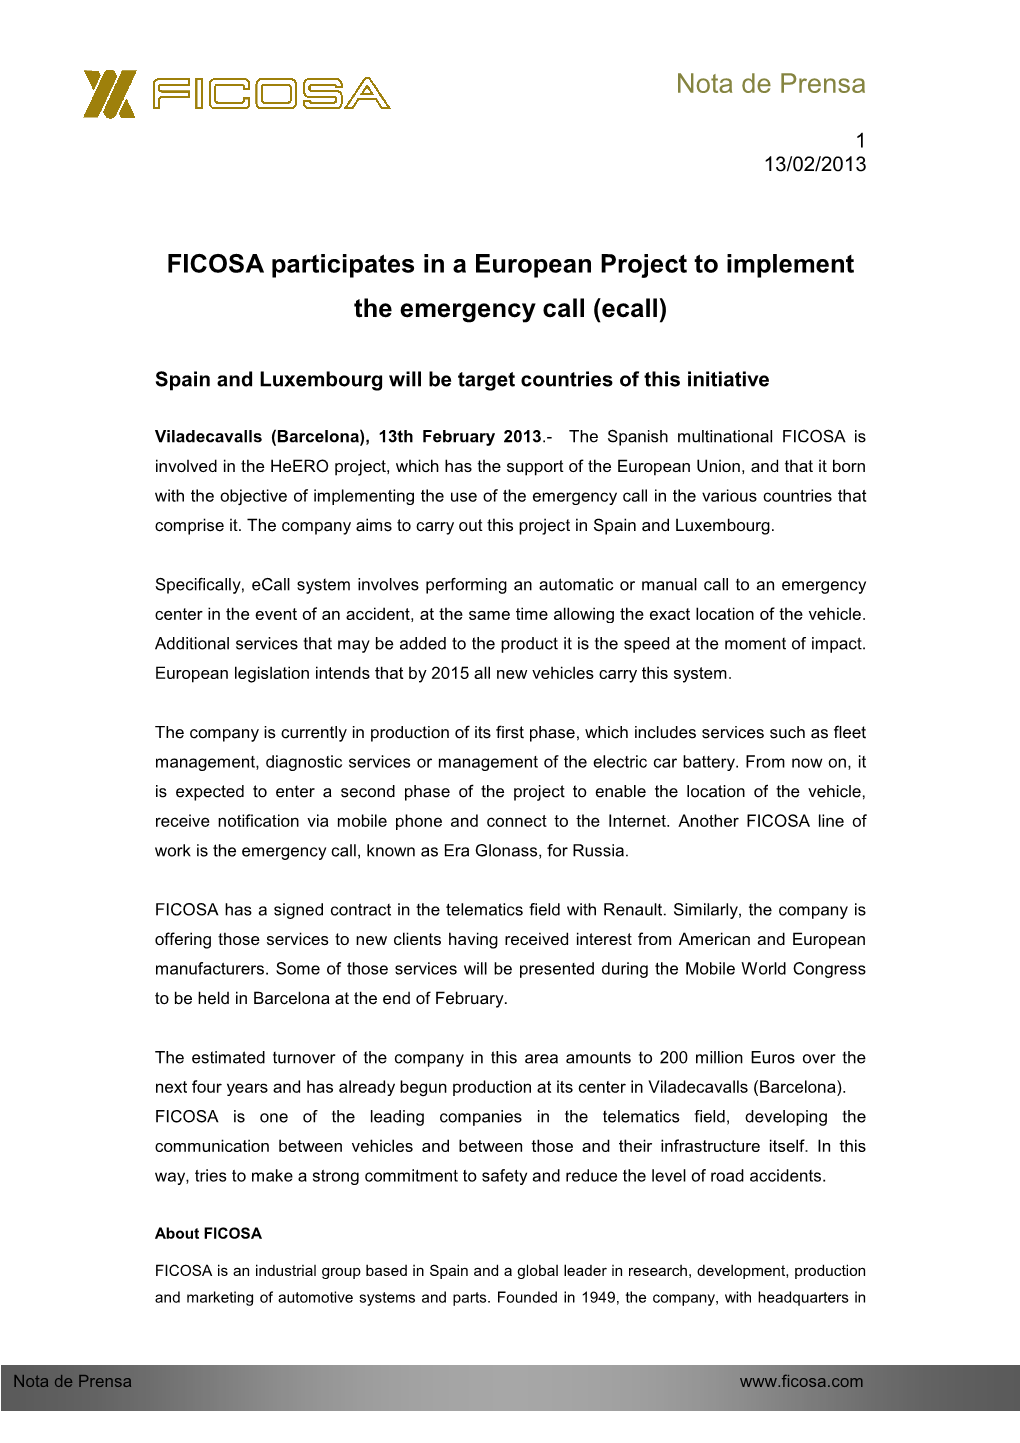 FICOSA Participates in a European Project to Implement the Emergency Call (Ecall)